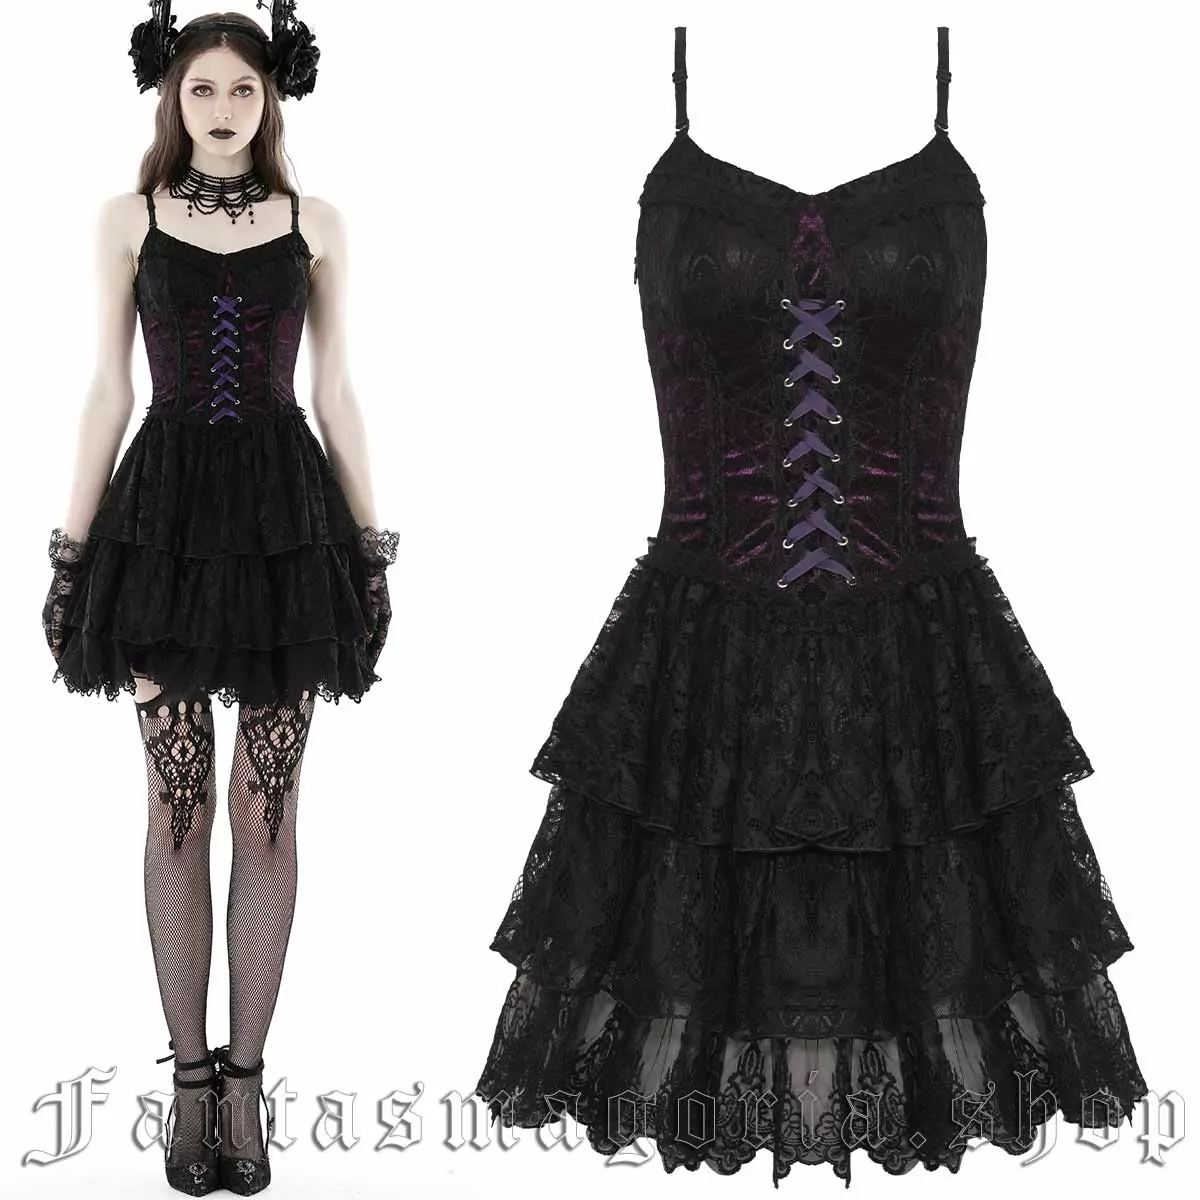 Women's Romantic Gothic purple and black frilly skirt lace and satin sleeveless mini dress. - Dark in Love - DW769